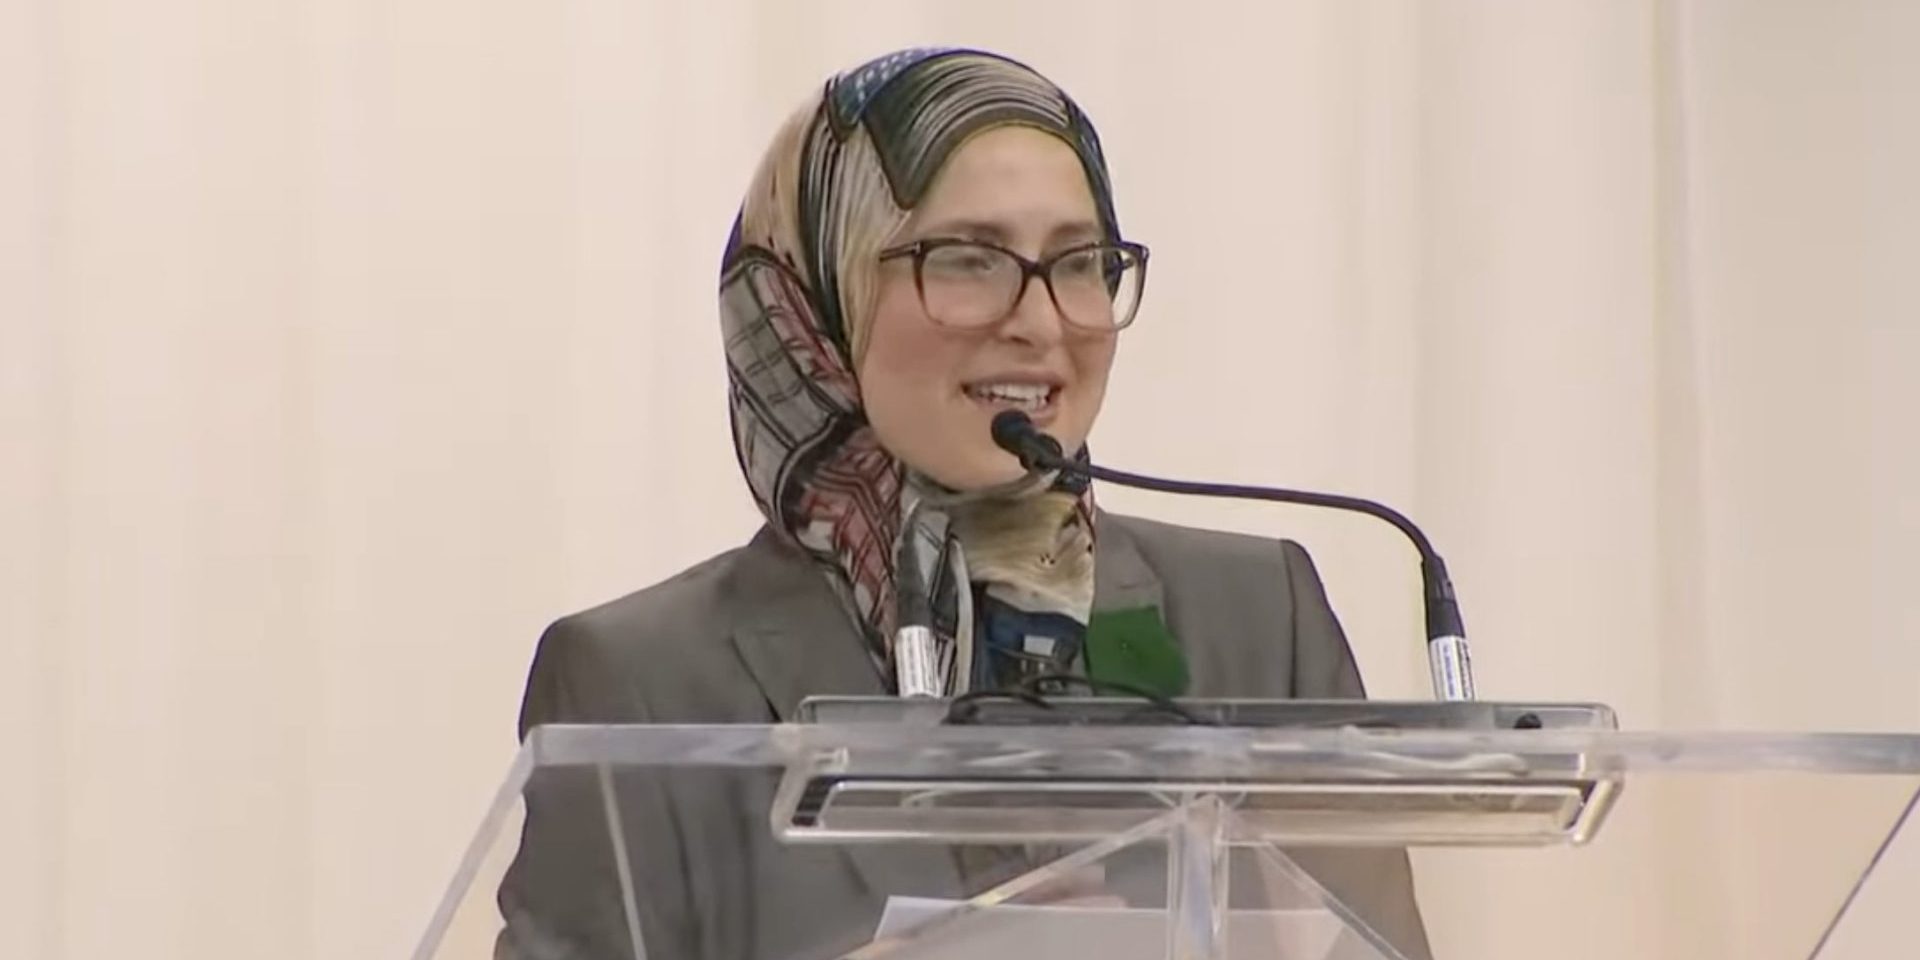 Amira Elghawaby was unveiled as the country’s new special representative to combatting Islamophobia on Jan. 26. Screenshot courtesy of Global News